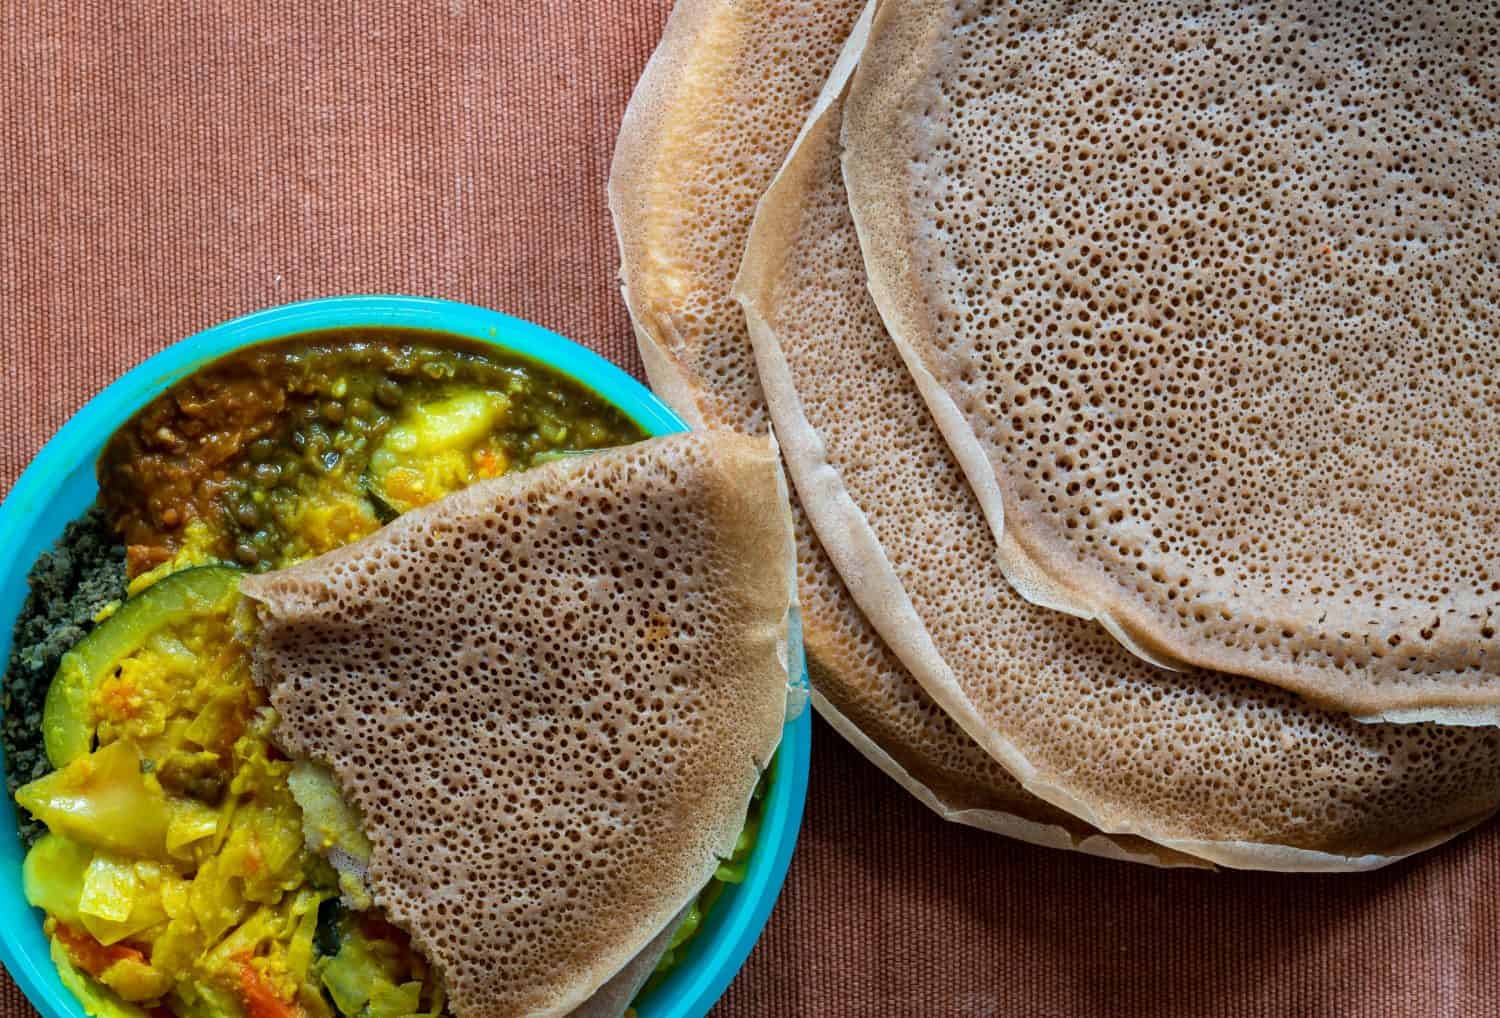 Flat lay view of Injera with lentils and vegetables, Injera is a sour fermented flatbread popular in Ethiopia and Eritrea